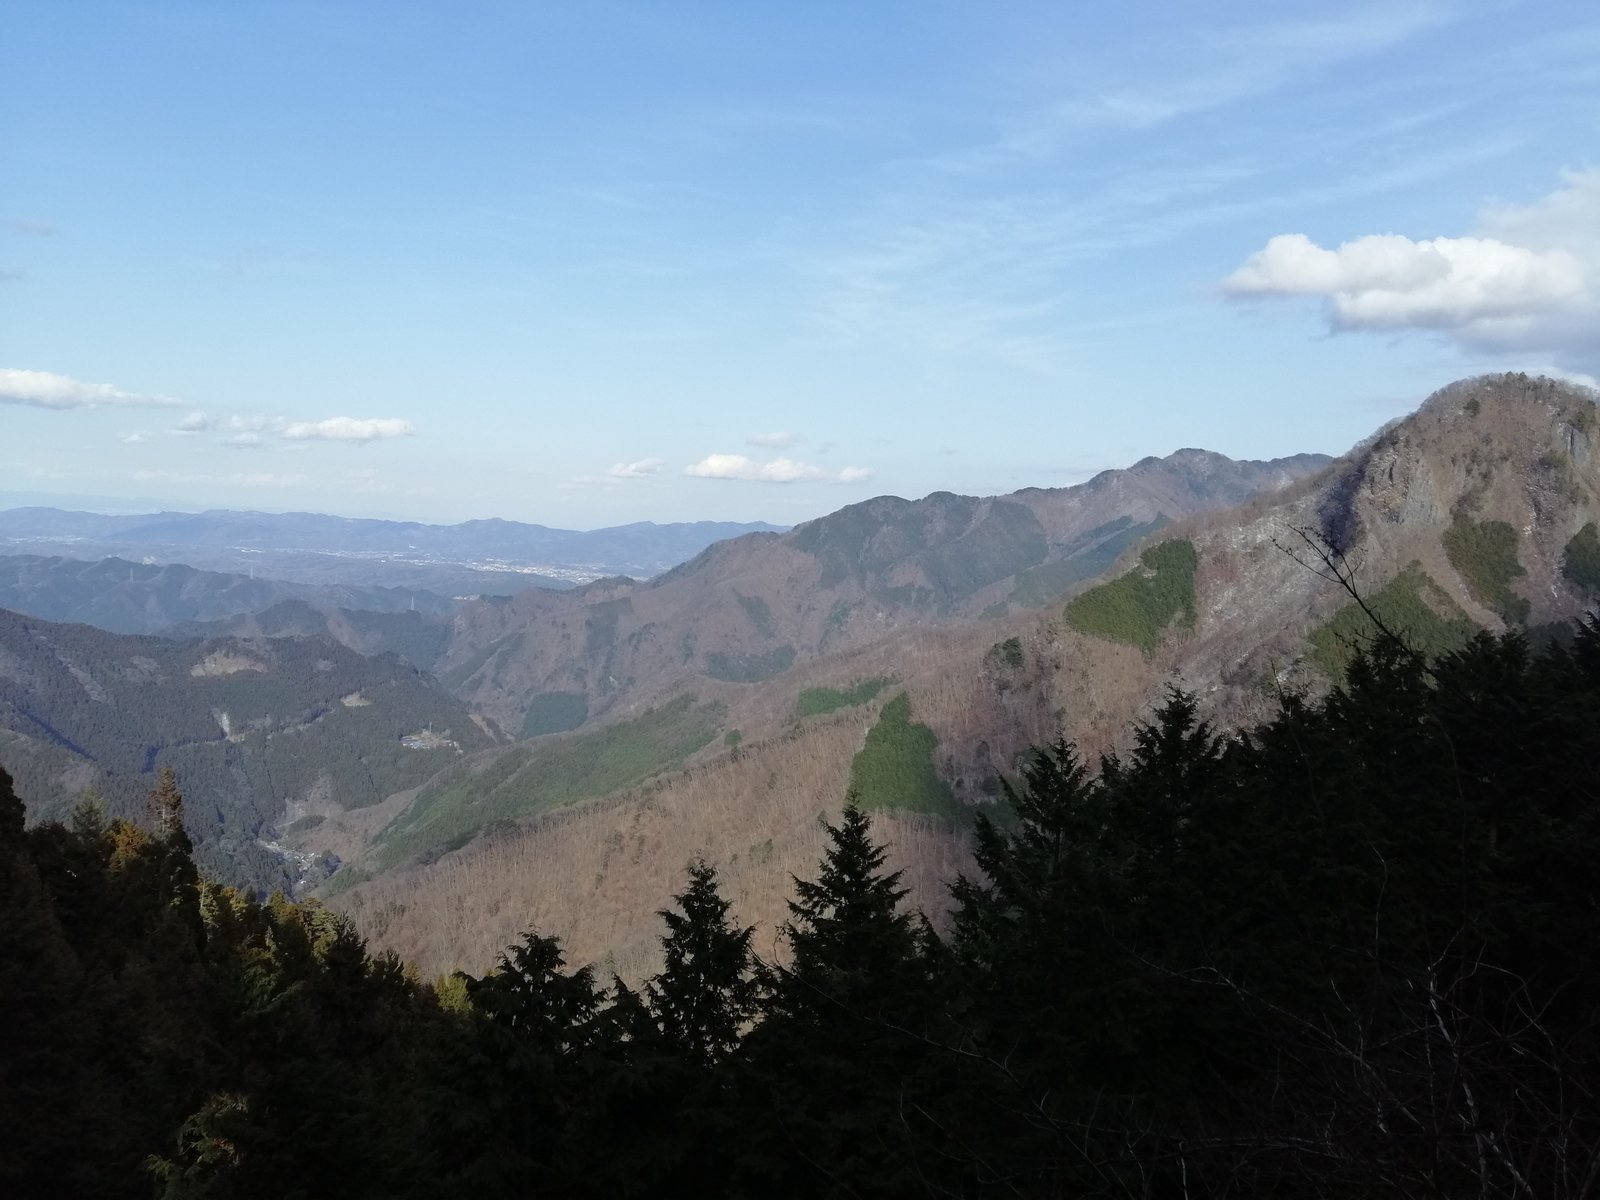 The view from Mitsumine shrine